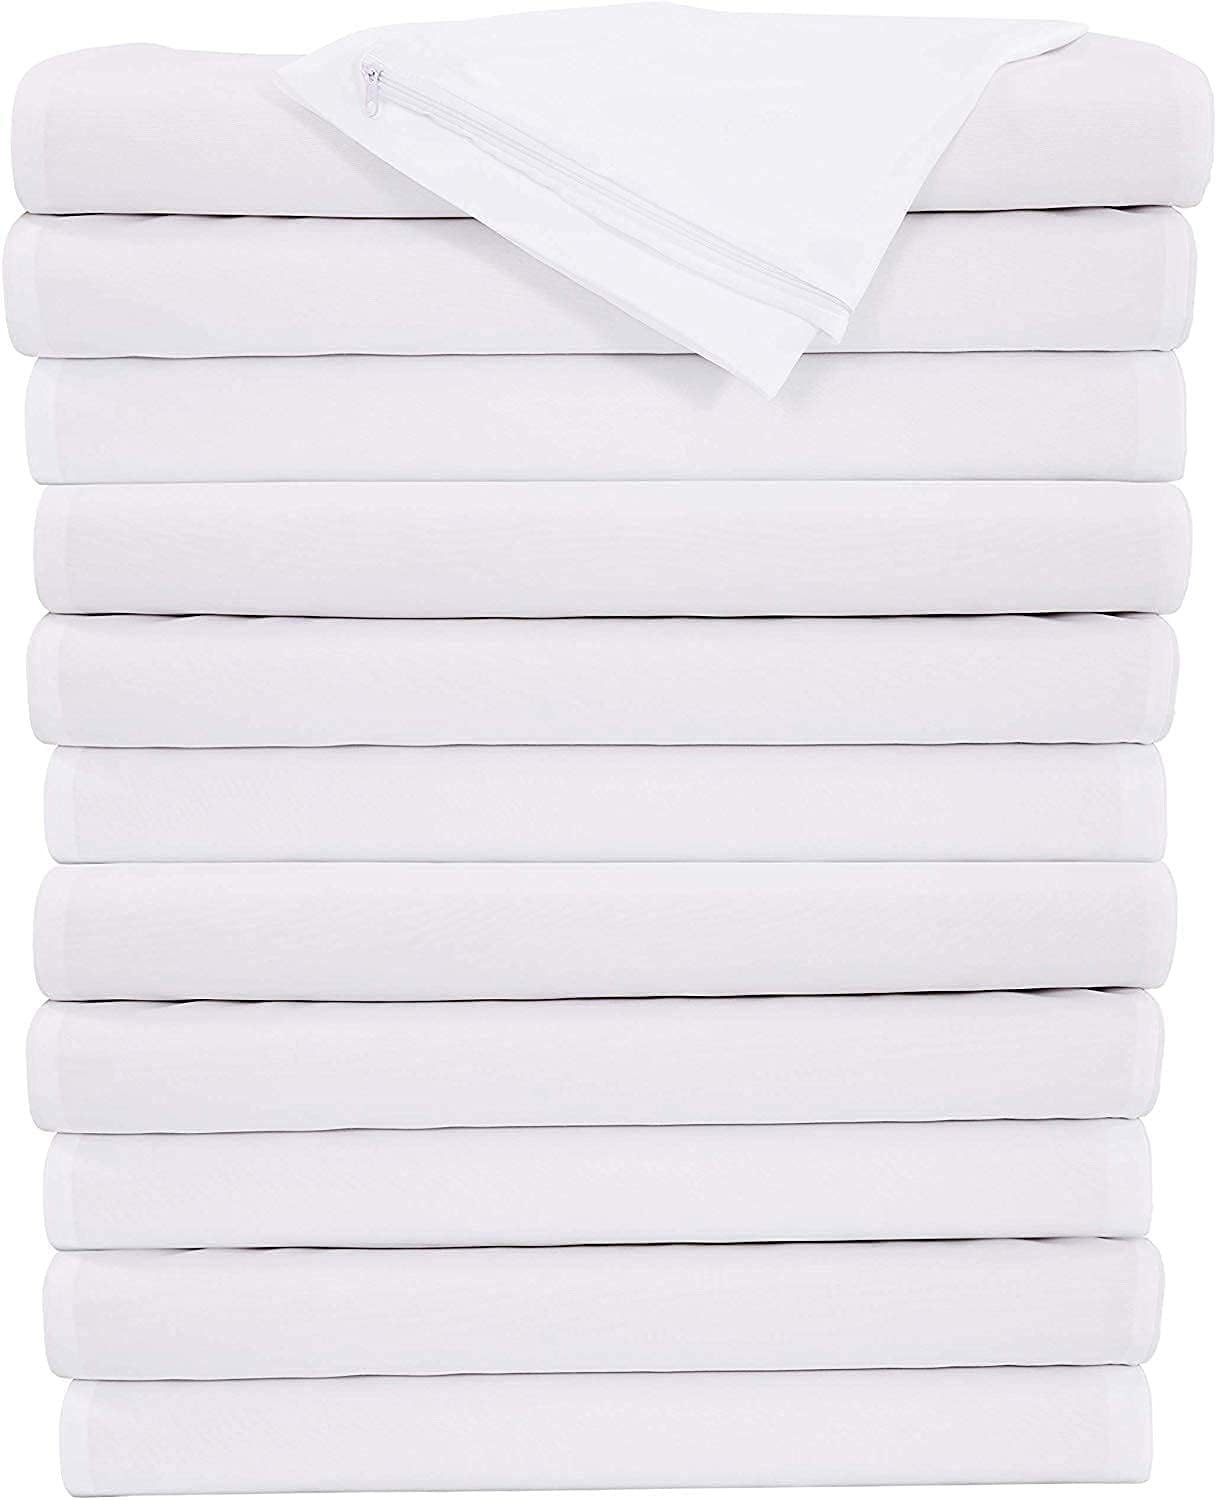 Niagara 12 Pack of Pillow Protectors with Zipper, Standard Size, Effective Dust Protection, Quiet, Stay in Place Pillow Covers, Breathable Case for Pillow Lifespan Extension (20x26 Inches, White)